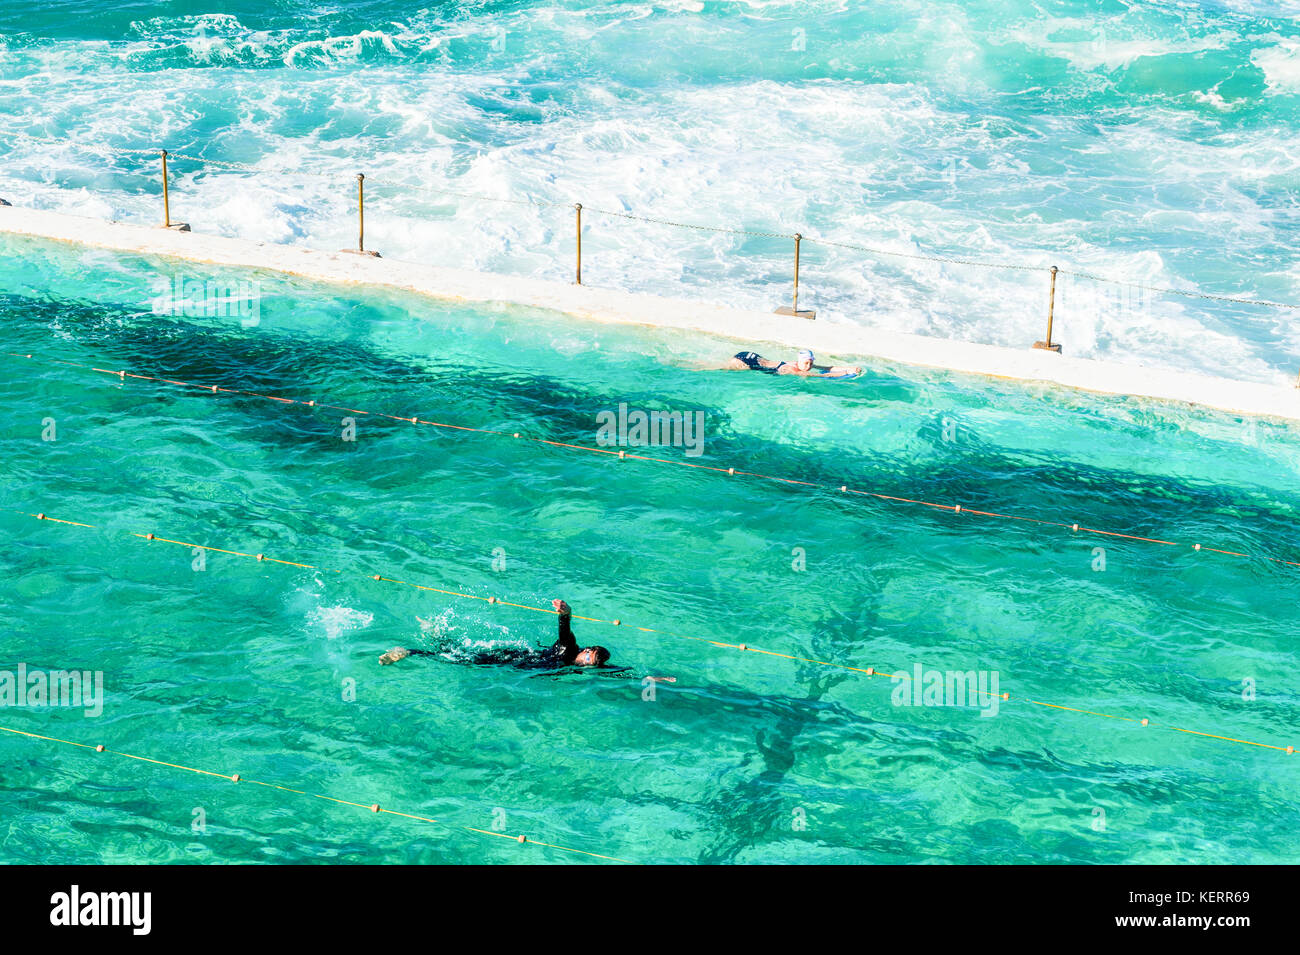 Swimmers enjoy the crystal clear waters of the outdoor pool and sea water around Bondi beach and the coastal walk from Coogee to Bondi in Sydney Austr Stock Photo